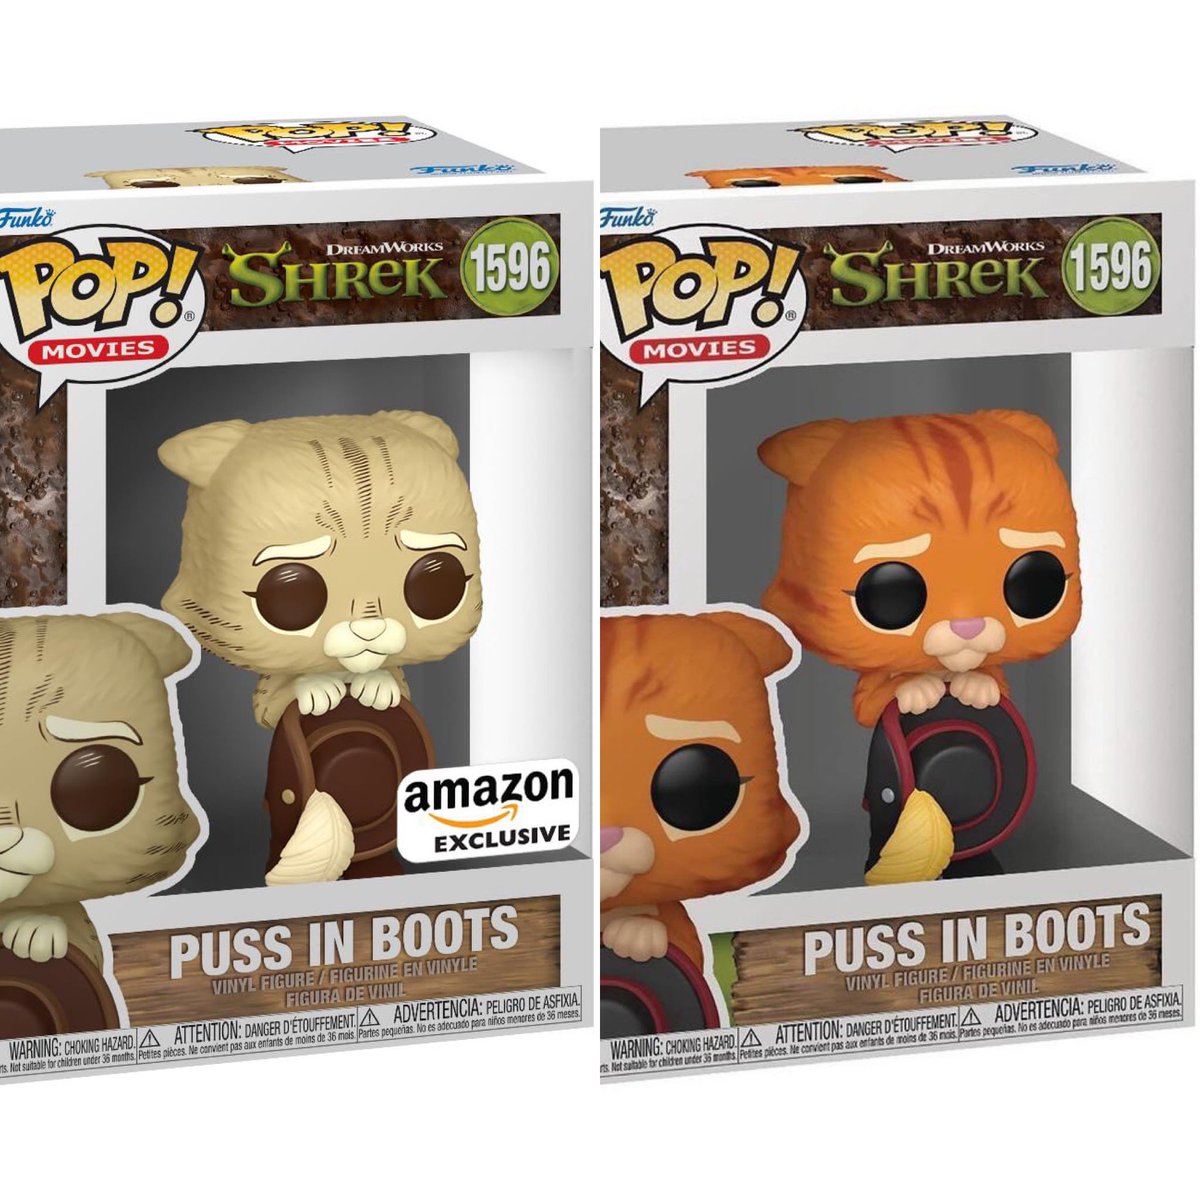 Flocked or Brown Puss? Are you happy with the new Puss or did you cancel because it wasn’t Furry 🤔
Linky ~ fnkpp.com/AmPuss
#Ad #Shrek #PussInBoots #FPN #FunkoPOPNews #Funko #POP #POPVinyl #FunkoPOP #FunkoSoda